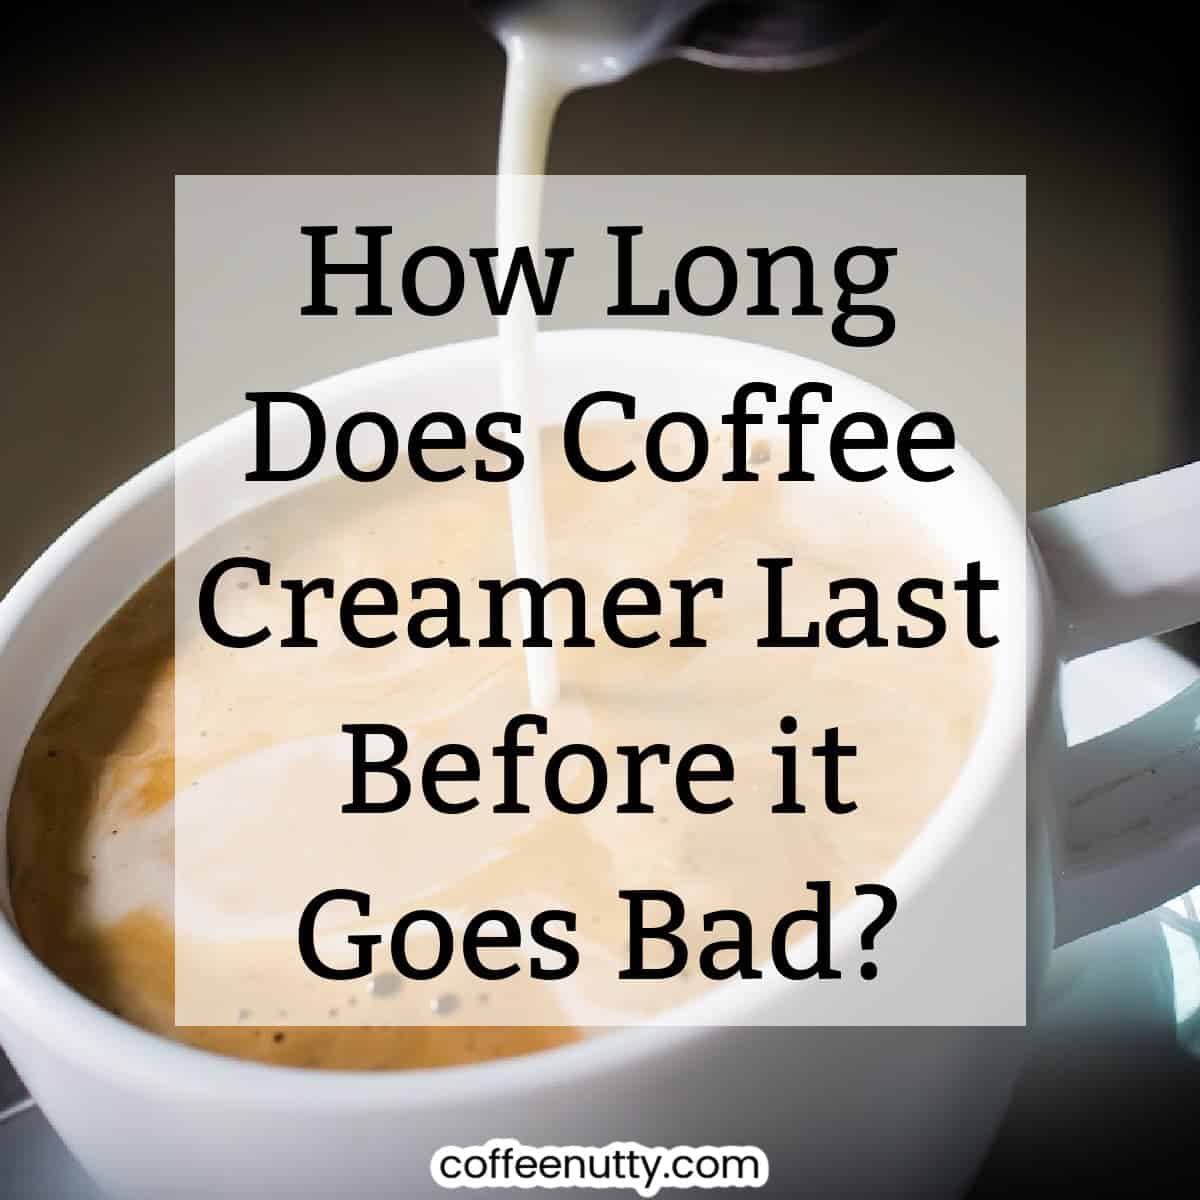 Coffee creamer pouring into mug of coffee with text written over it.